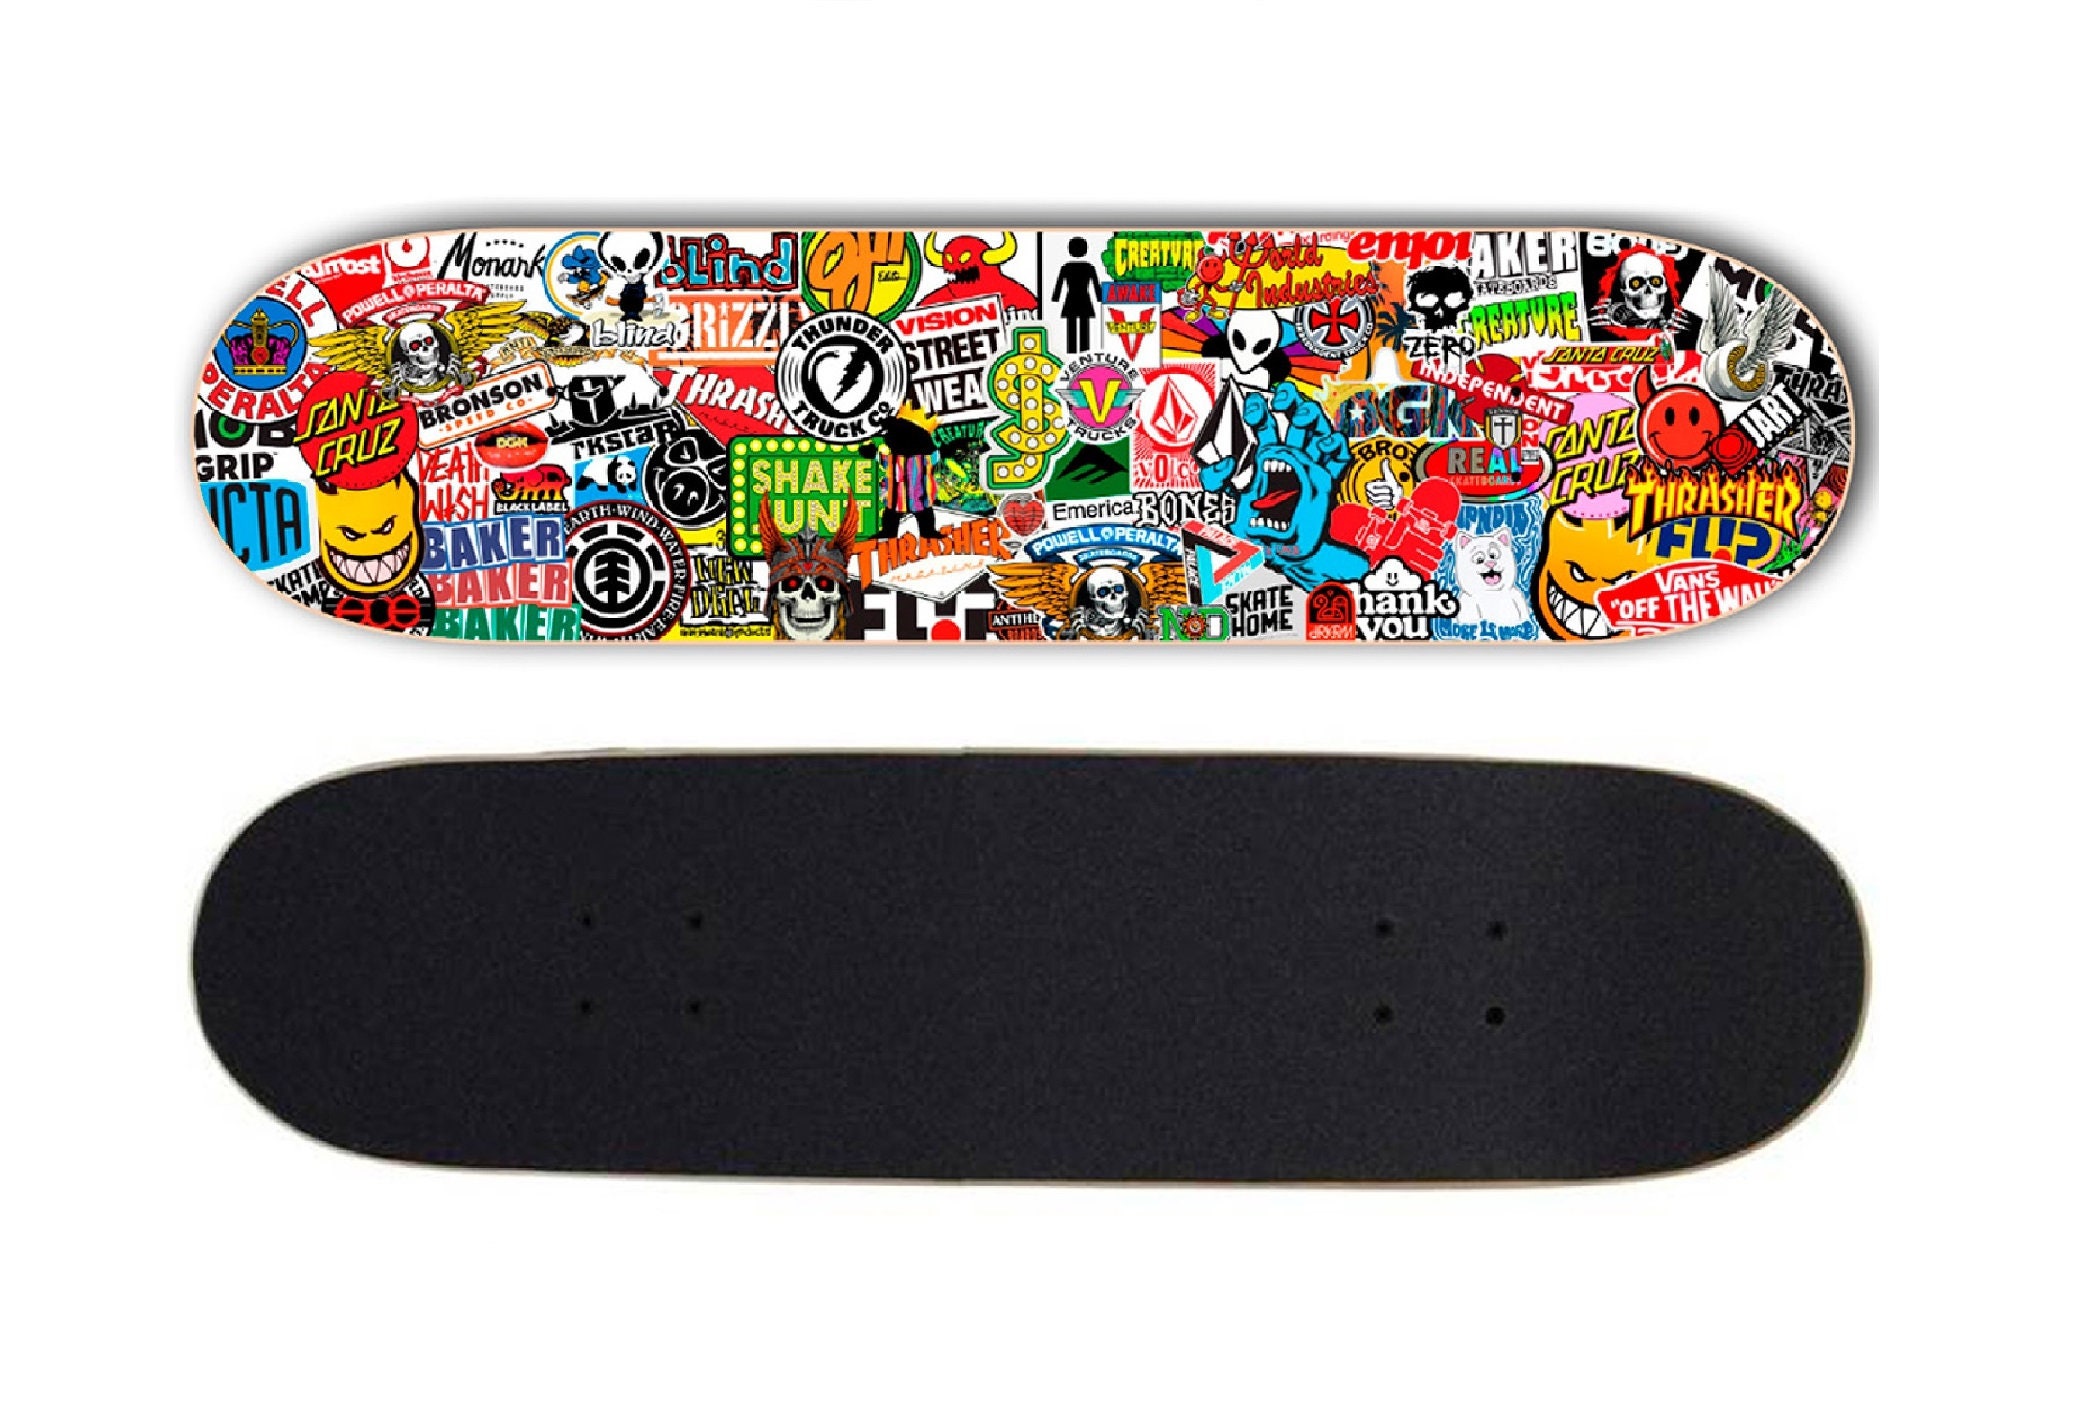 Skateboard Deck With Images of Stickers From the Best Skateboarding Brands  